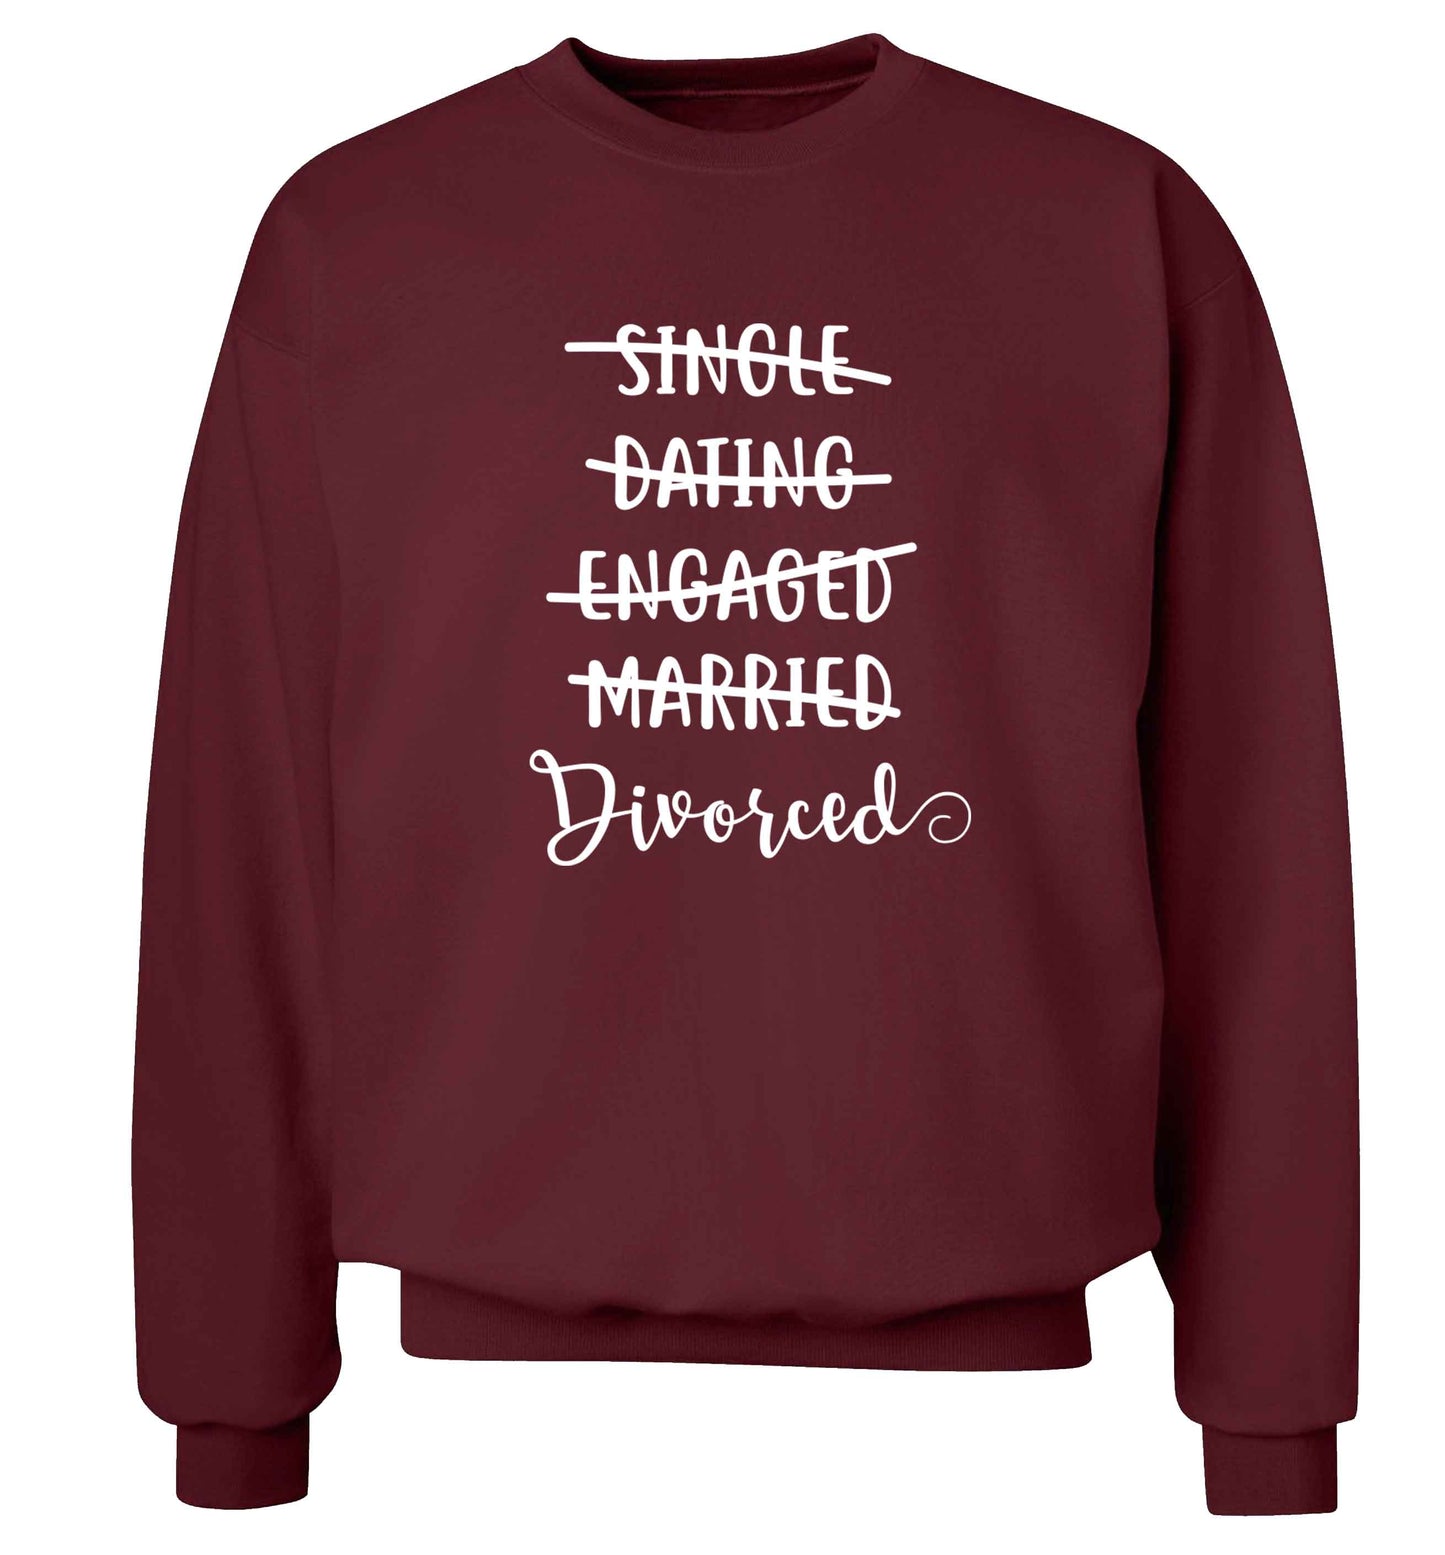 Single, dating, engaged, divorced Adult's unisex maroon Sweater 2XL